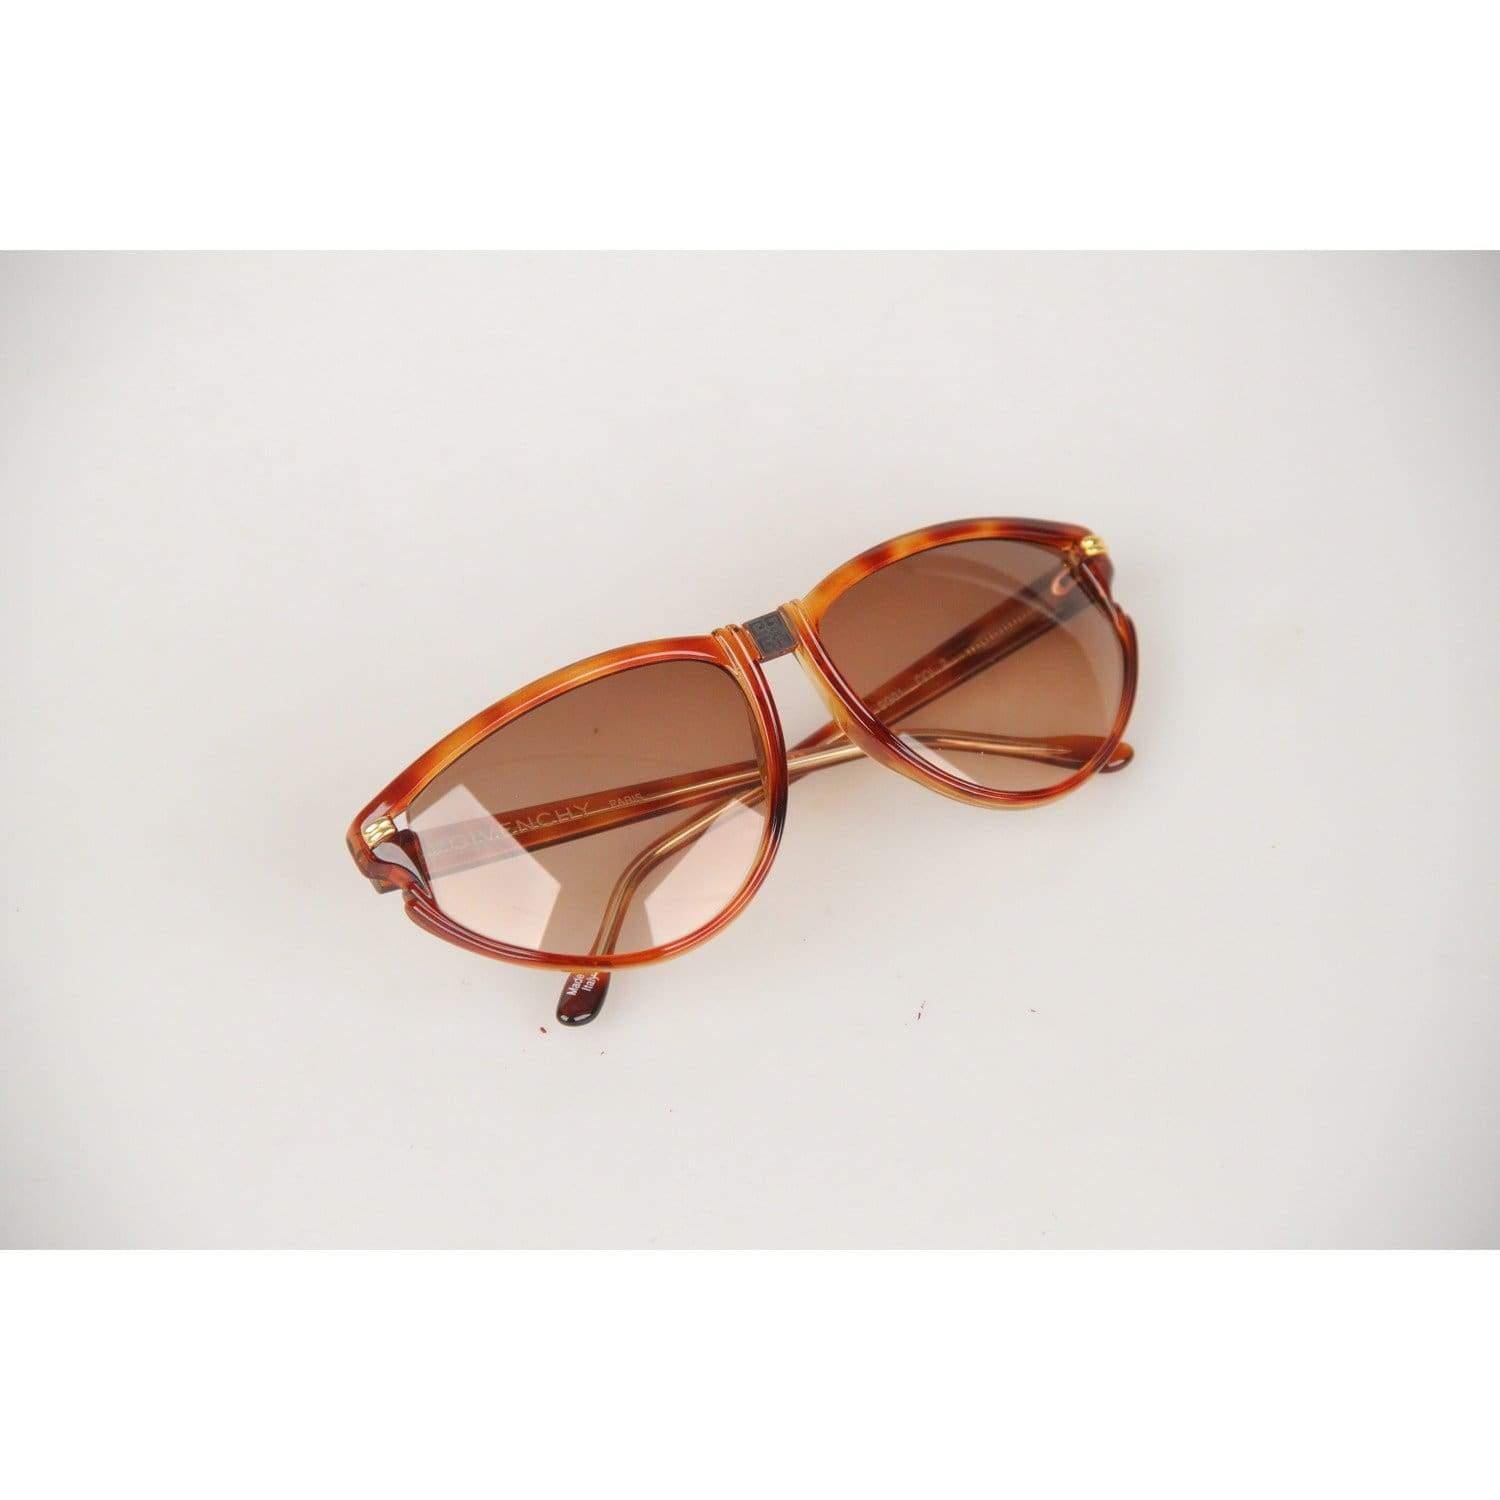 Women's Givenchy Vintage Brown Sunglasses SG01 COL 02